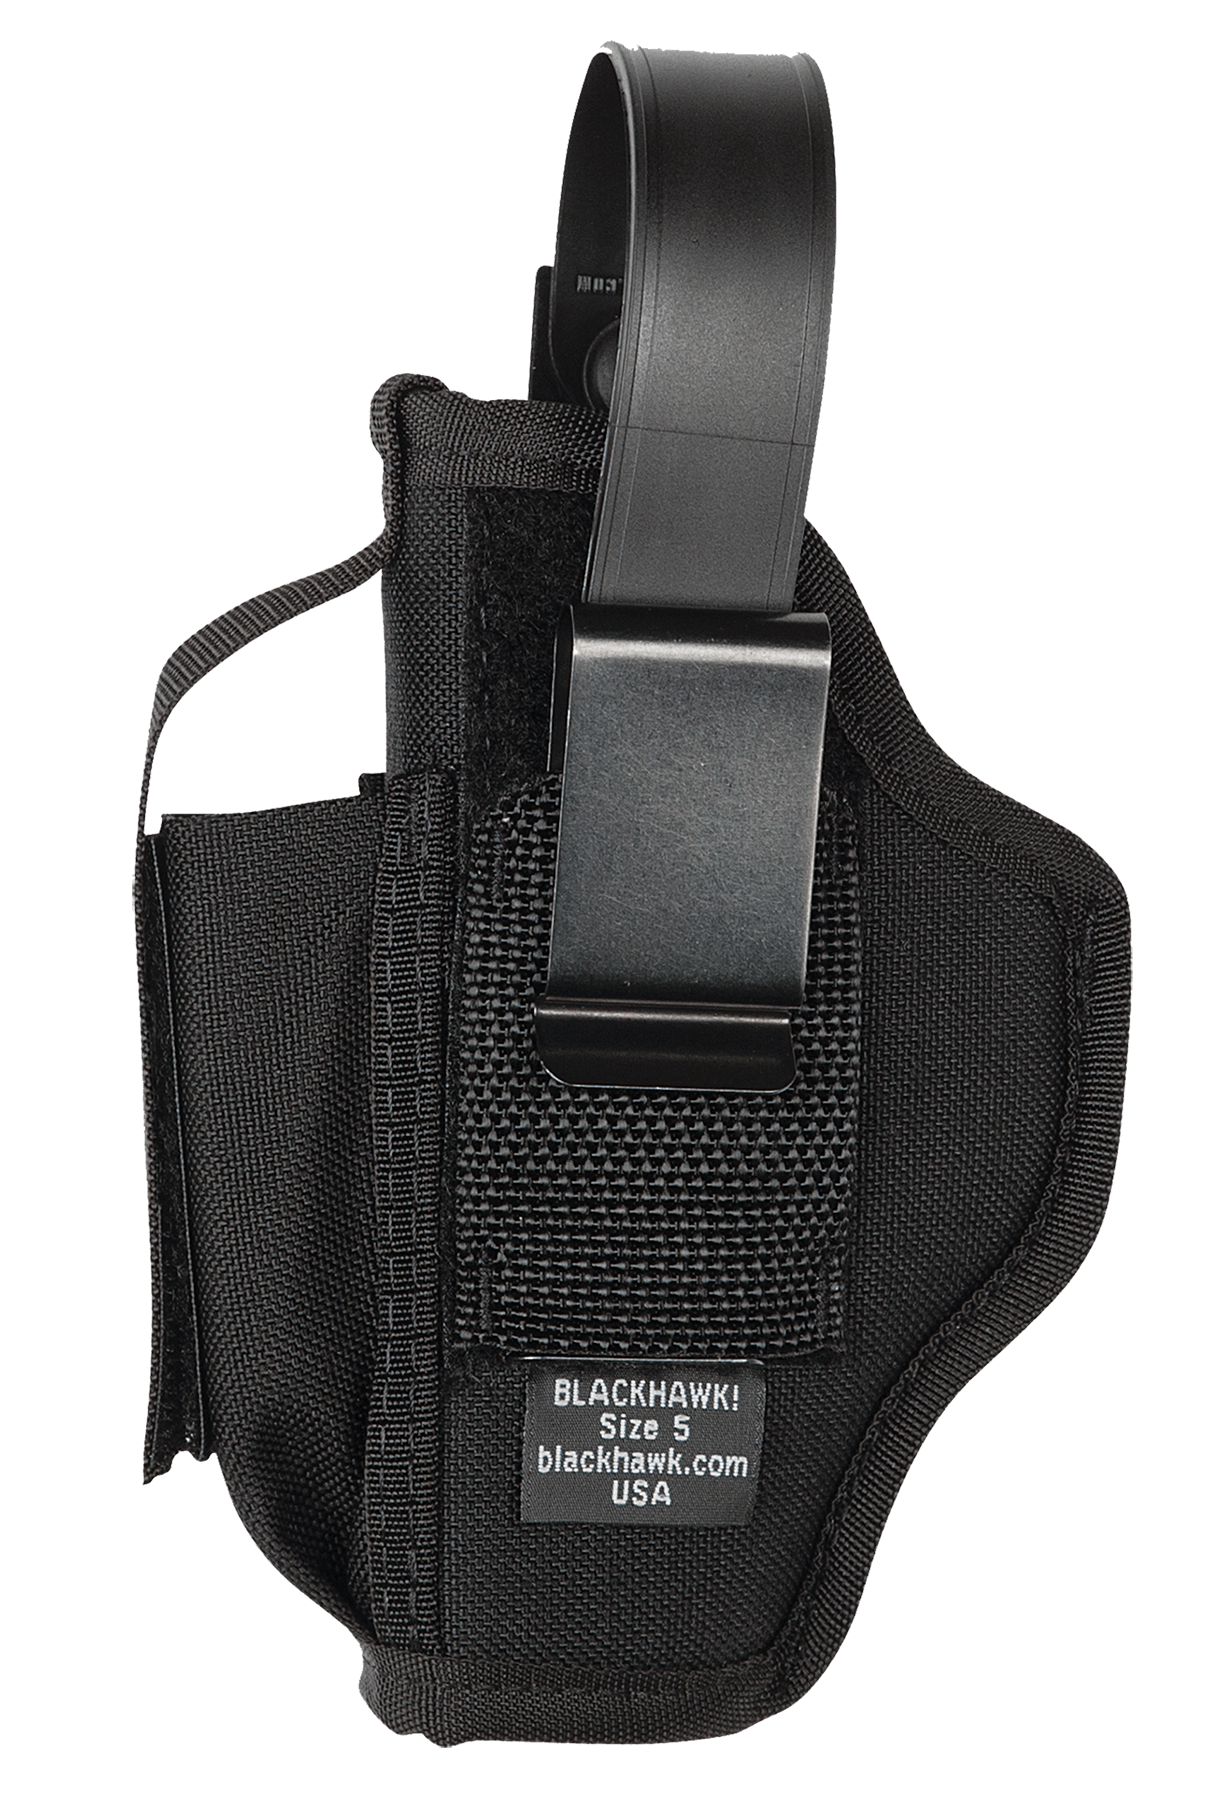 Blackhawk Blackhawk Ambidextrous Holster - W/mag Pouch #05 Nylon Black Holsters And Related Items